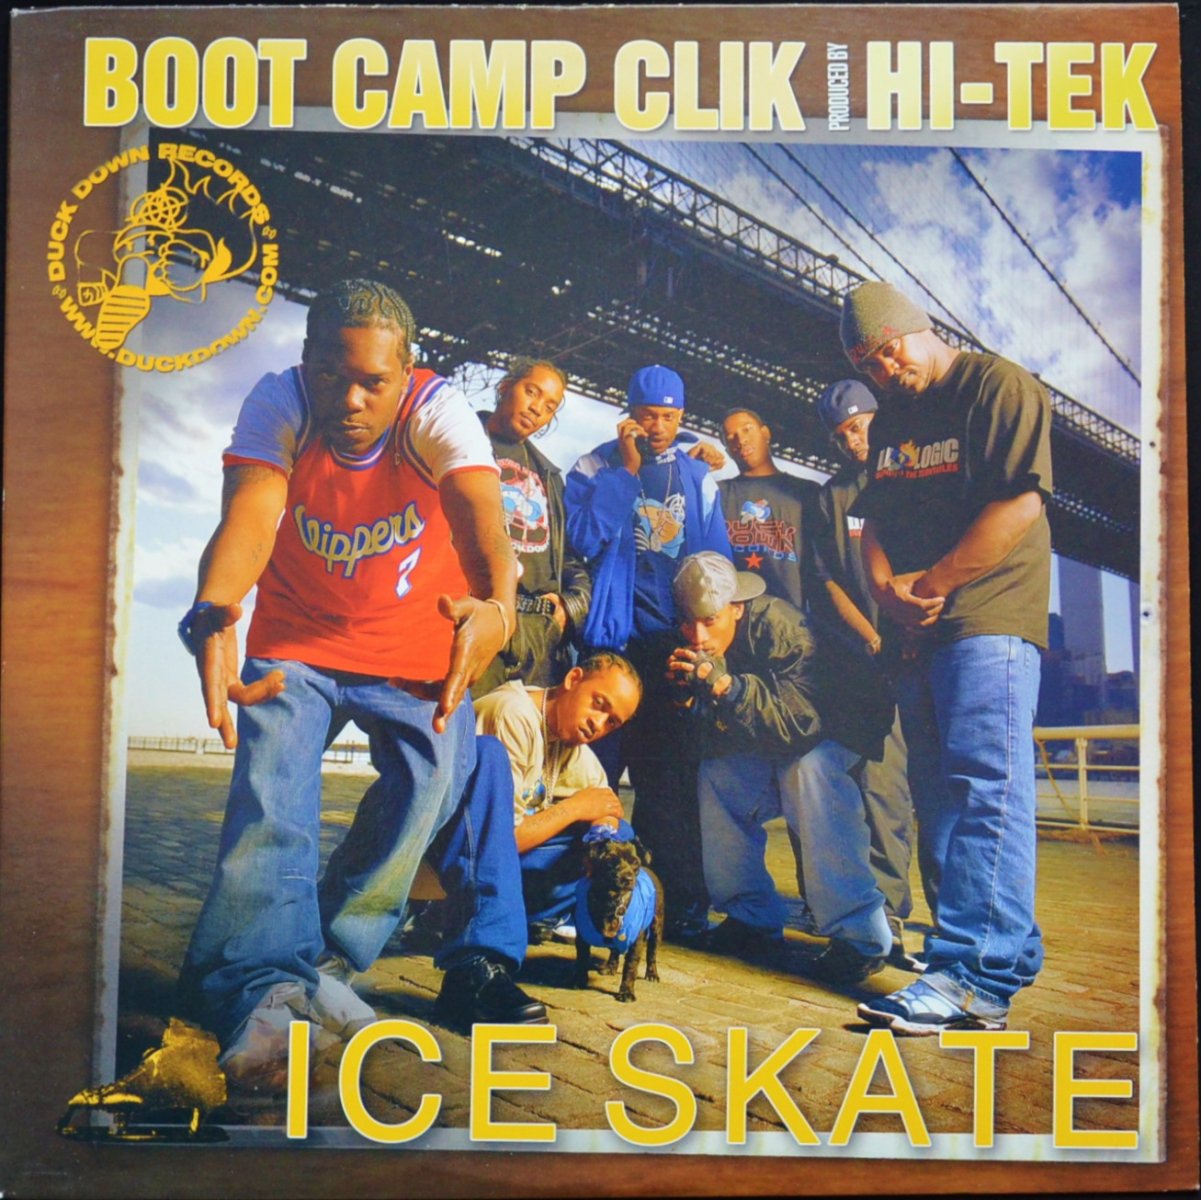 BOOT CAMP CLIK / ICE SKATE (PROD BY HI-TEK) / WELCOME 2 BUCTOWN USA / LET'S ROLL (12